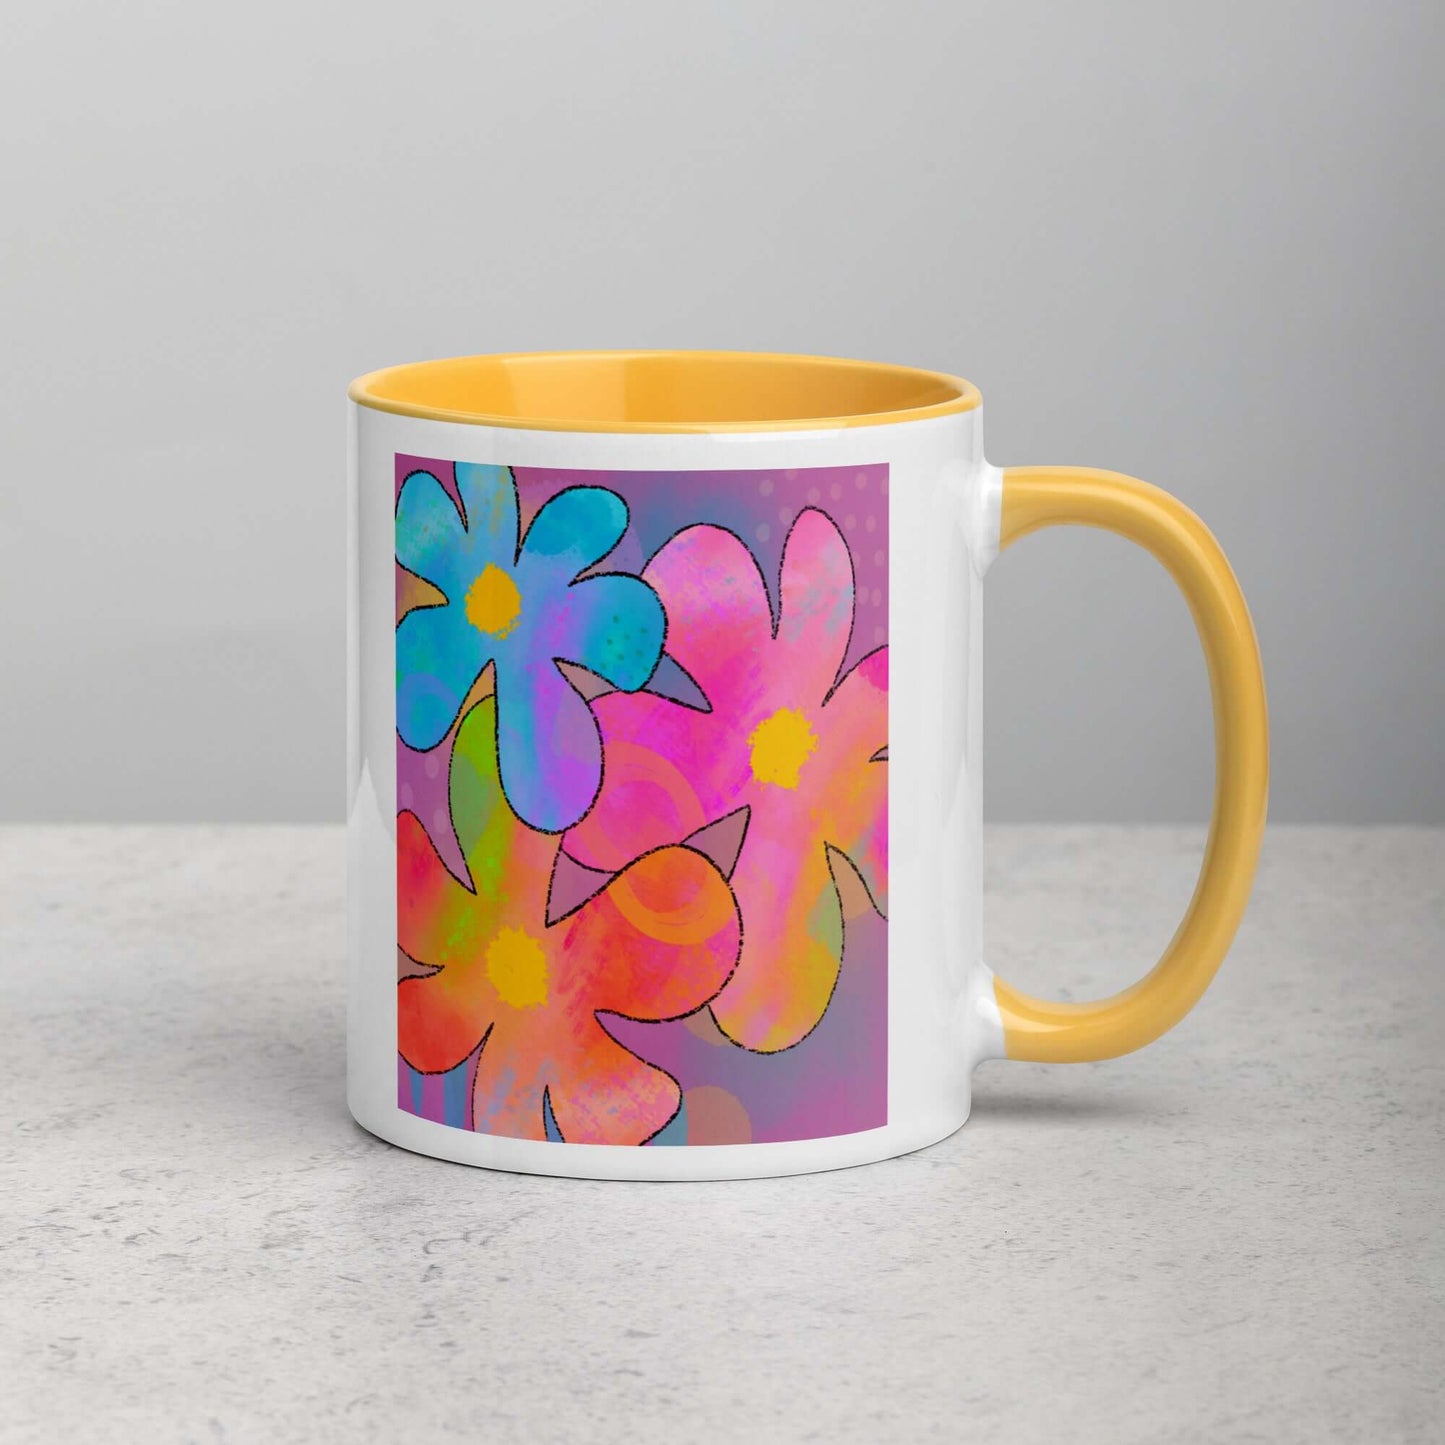 Big Colorful 1960s Psychedelic “Hippie Flowers” Mug with Golden Yellow Color Inside Right Handed Front View